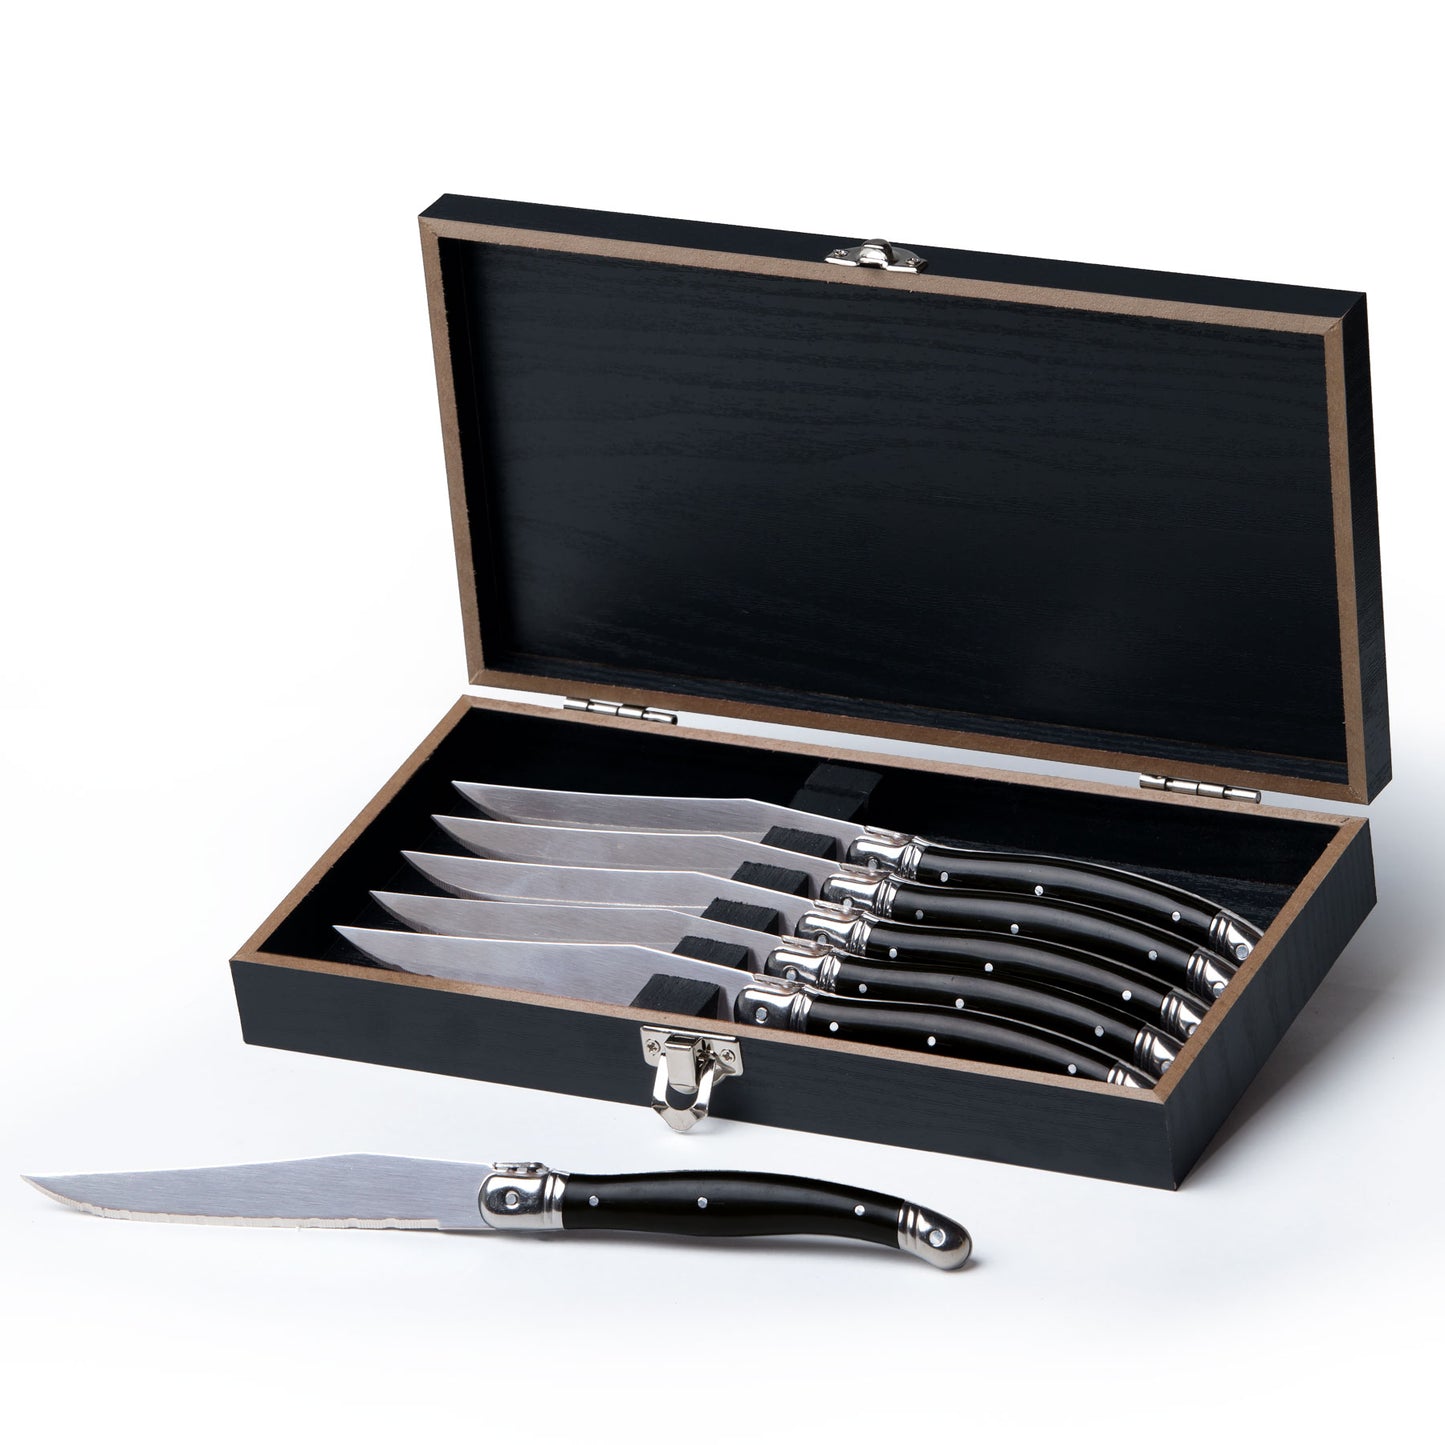 Six piece knife set in black bespoke beech wood box with hinges